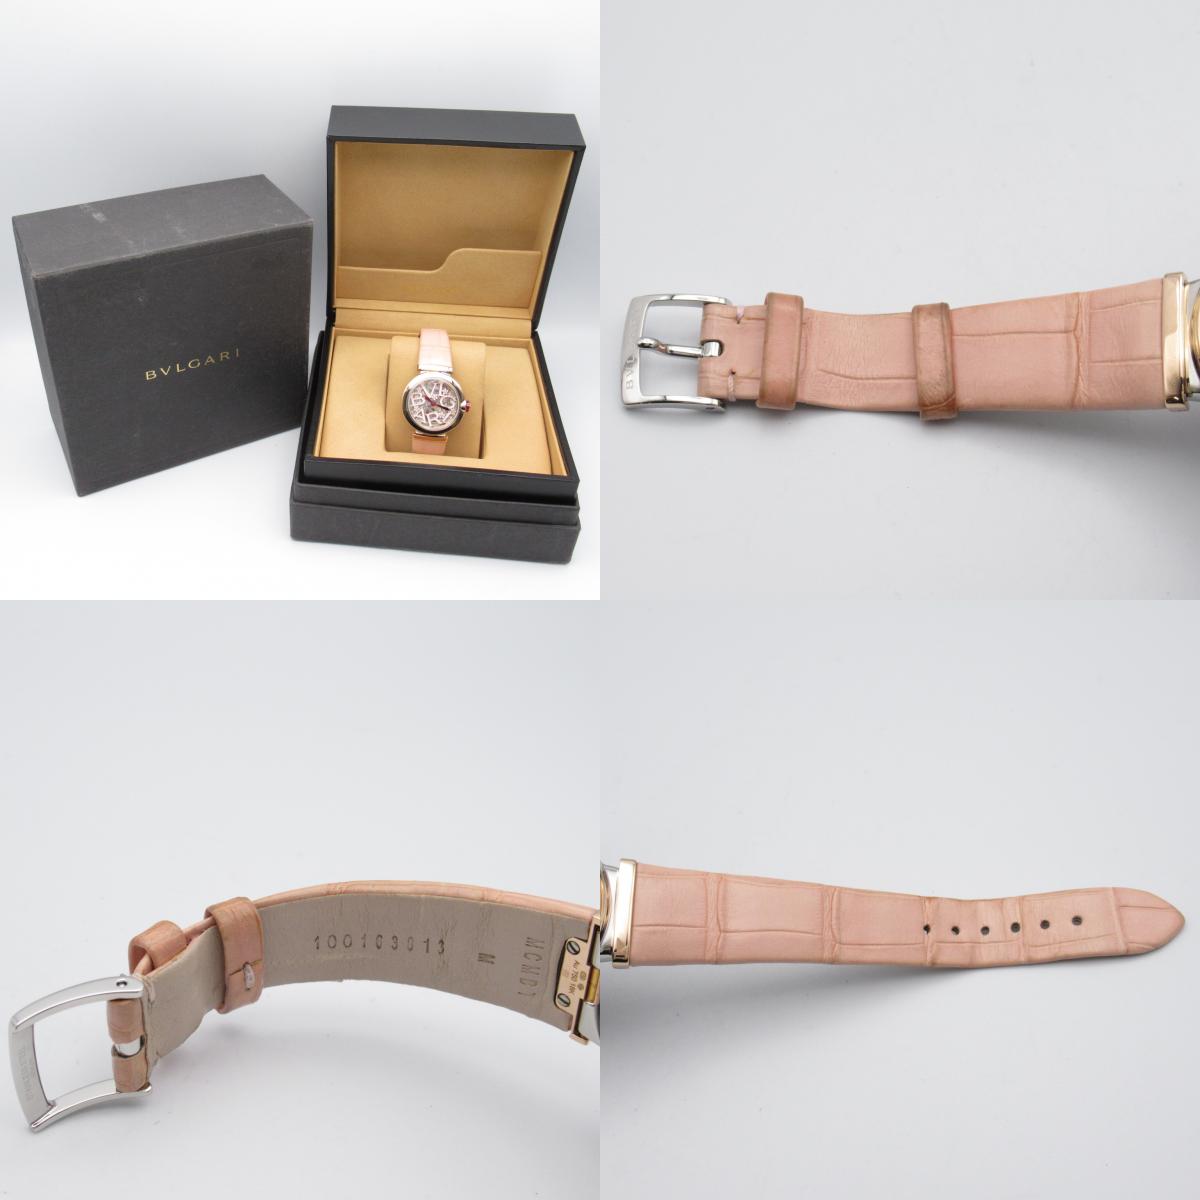 Bulgari BVLGARI Cherry Cherry  Watch K18PG (Pink G) Stainless Steel Leather  Pink / Clear / Skeleton LUP33SG